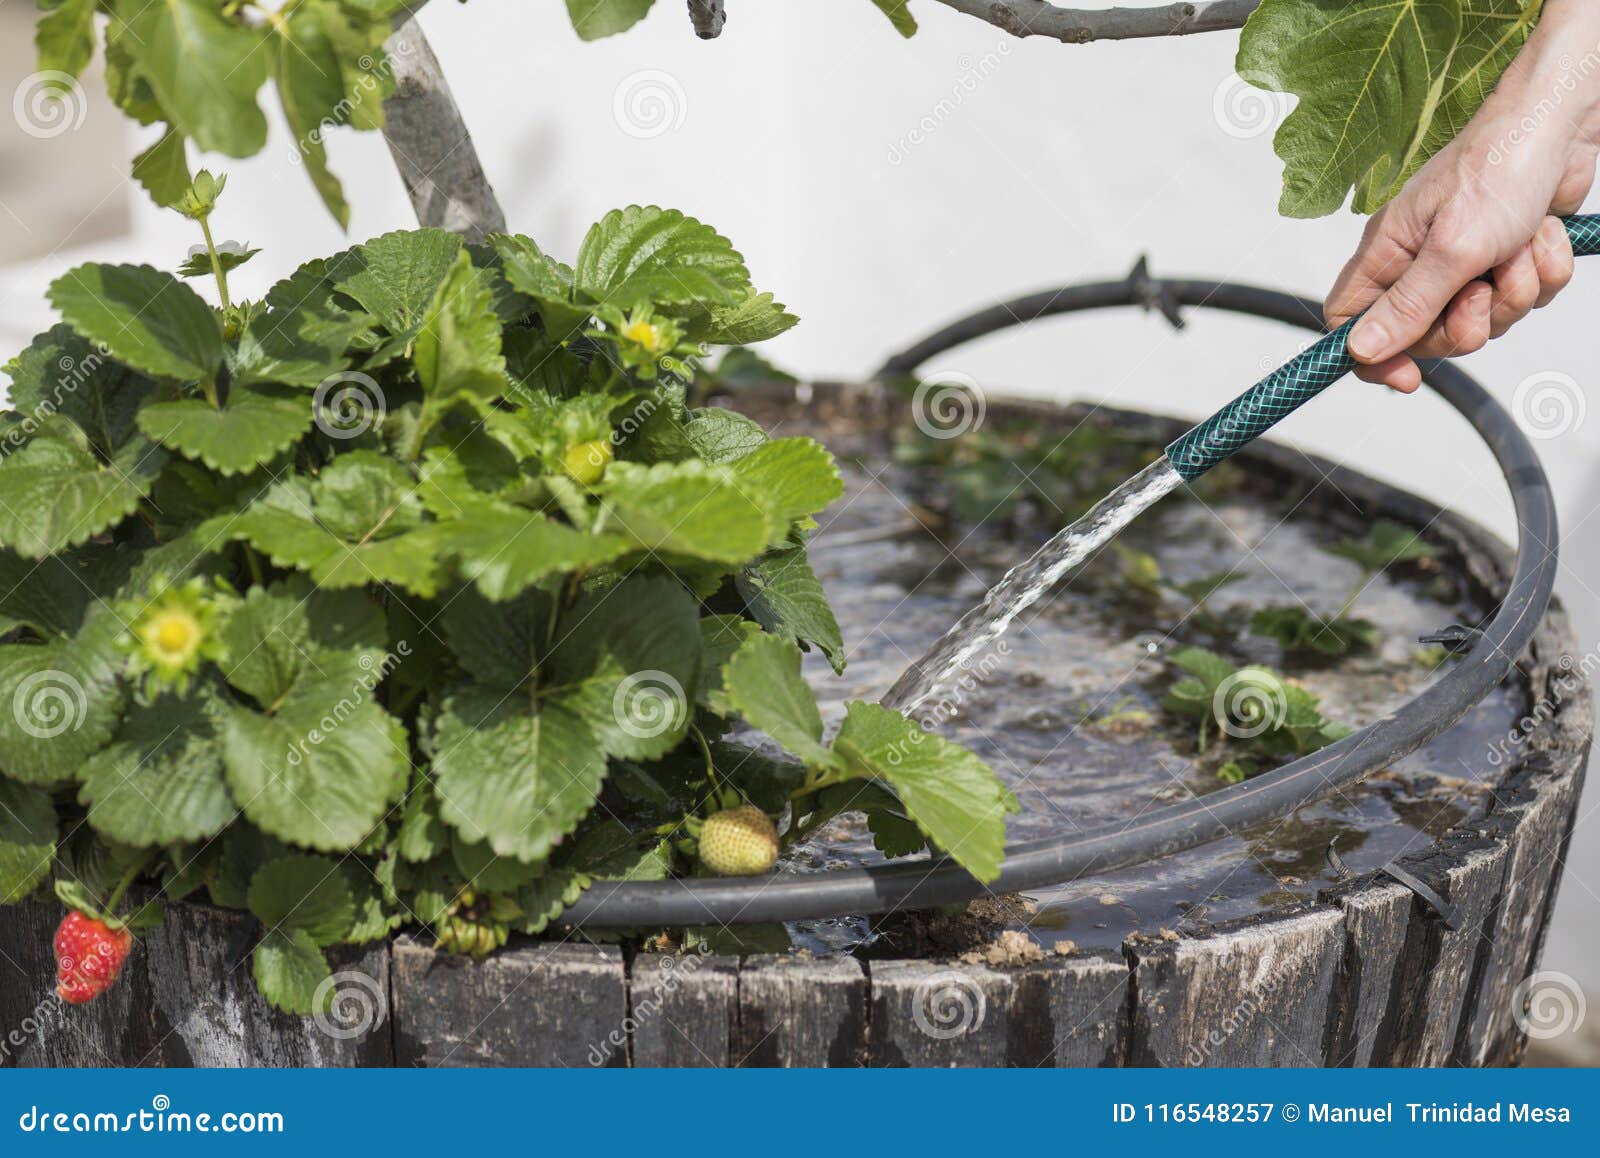 person watering the strawberry plants